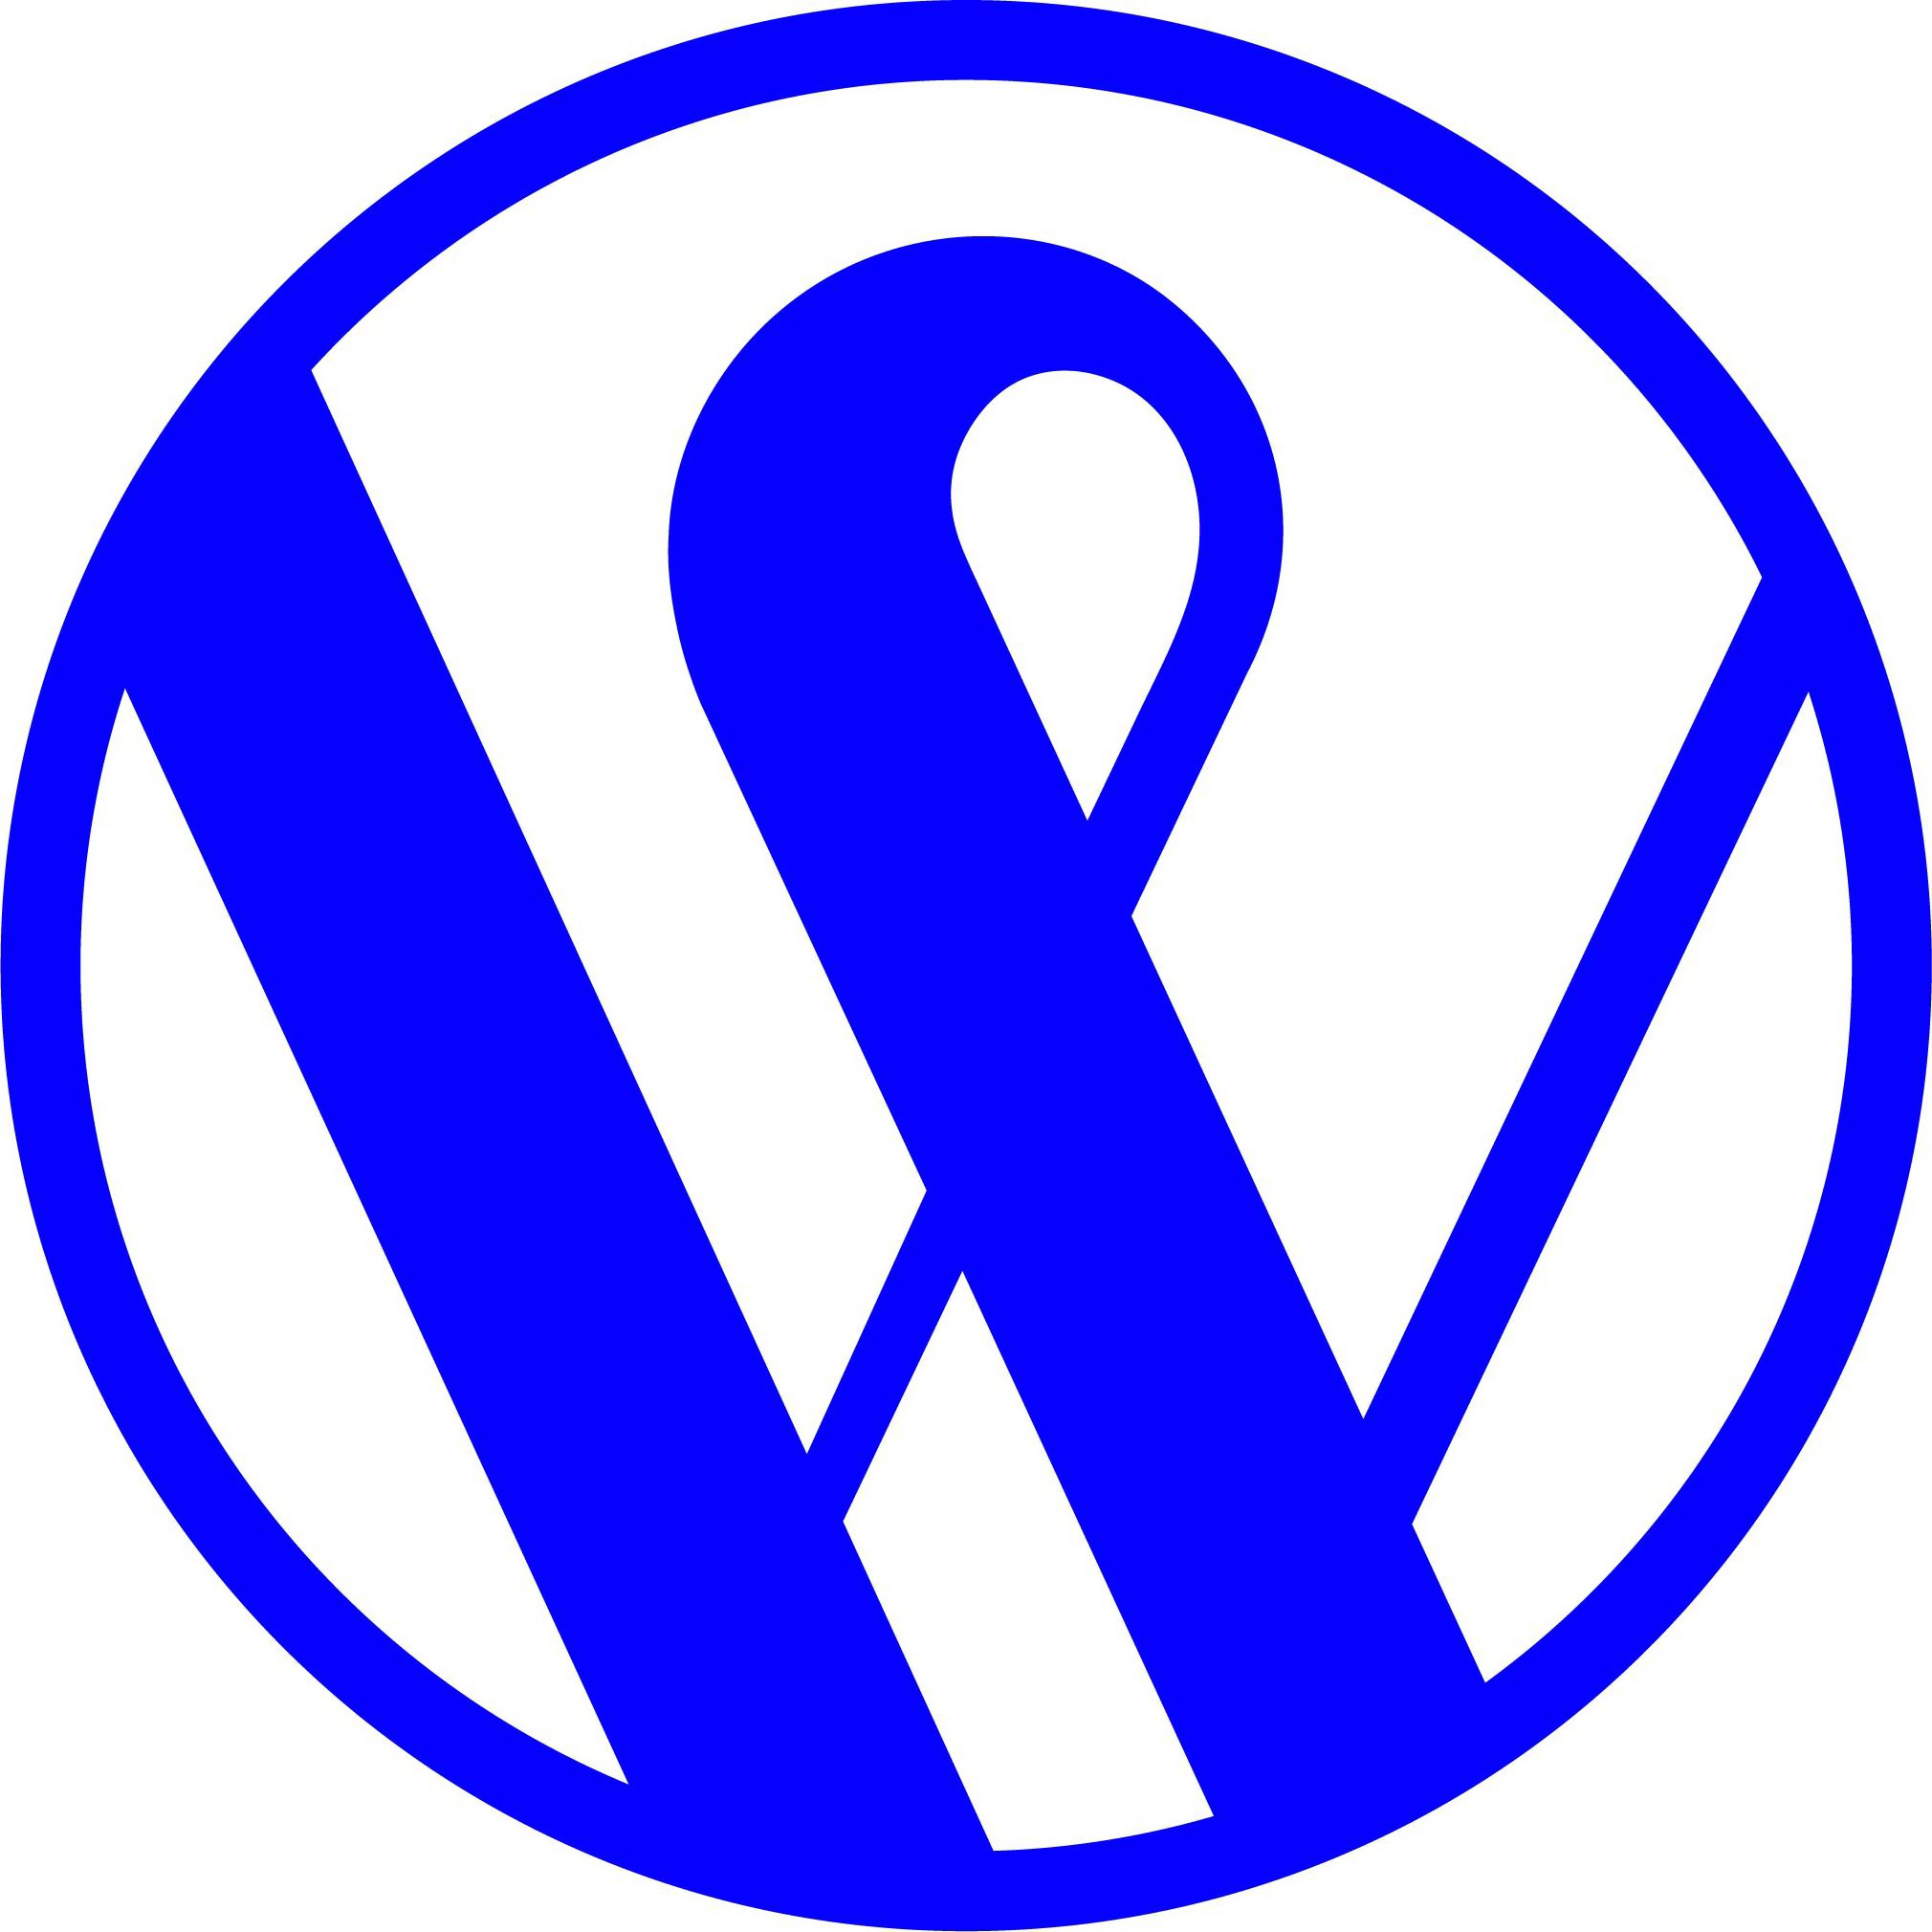  THE LETTER W